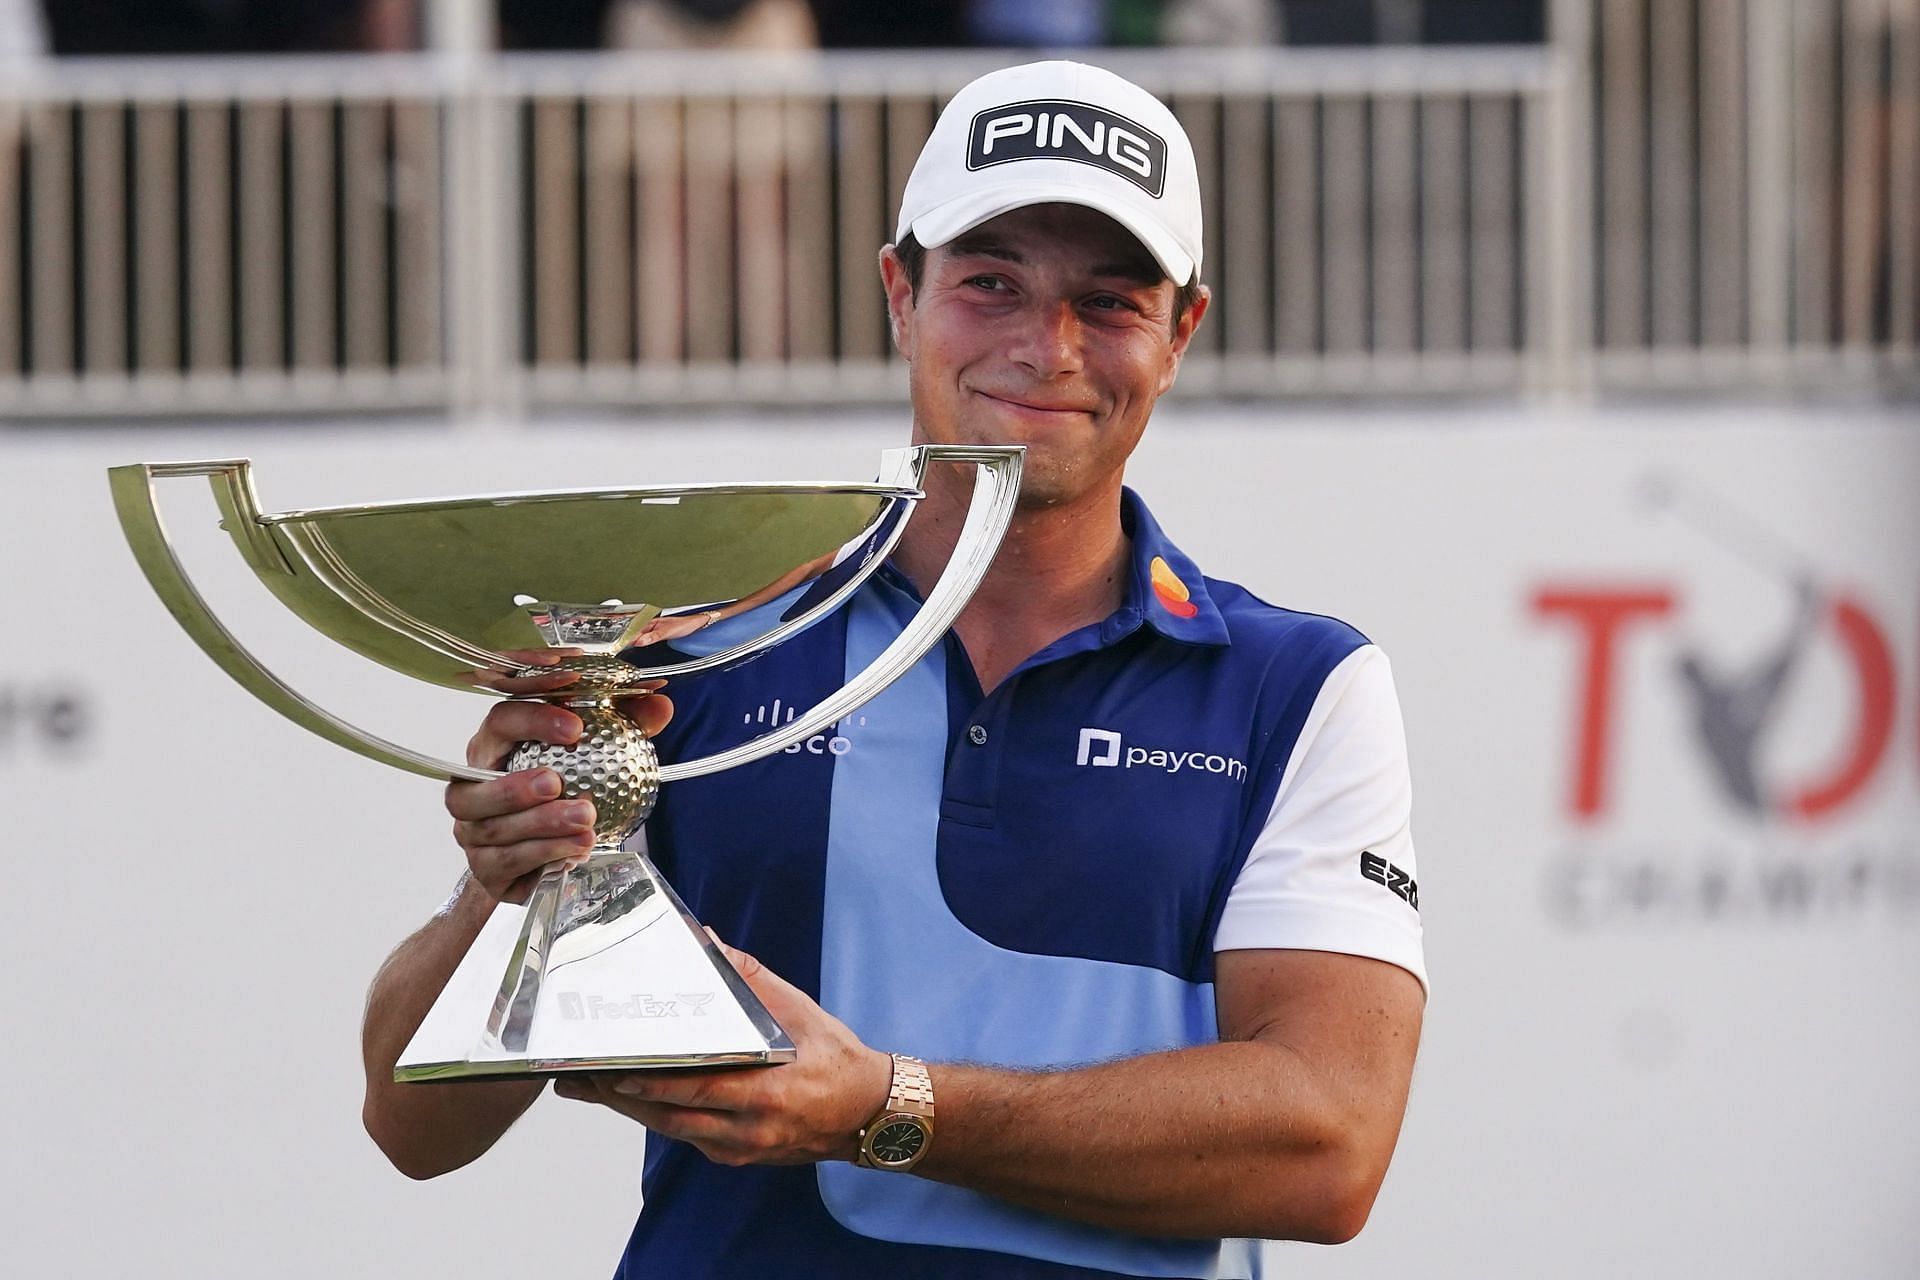 Viktor Hovland celebrates winning the Tour Championship golf tournament with the FedEx Cup trophy on the 18th green